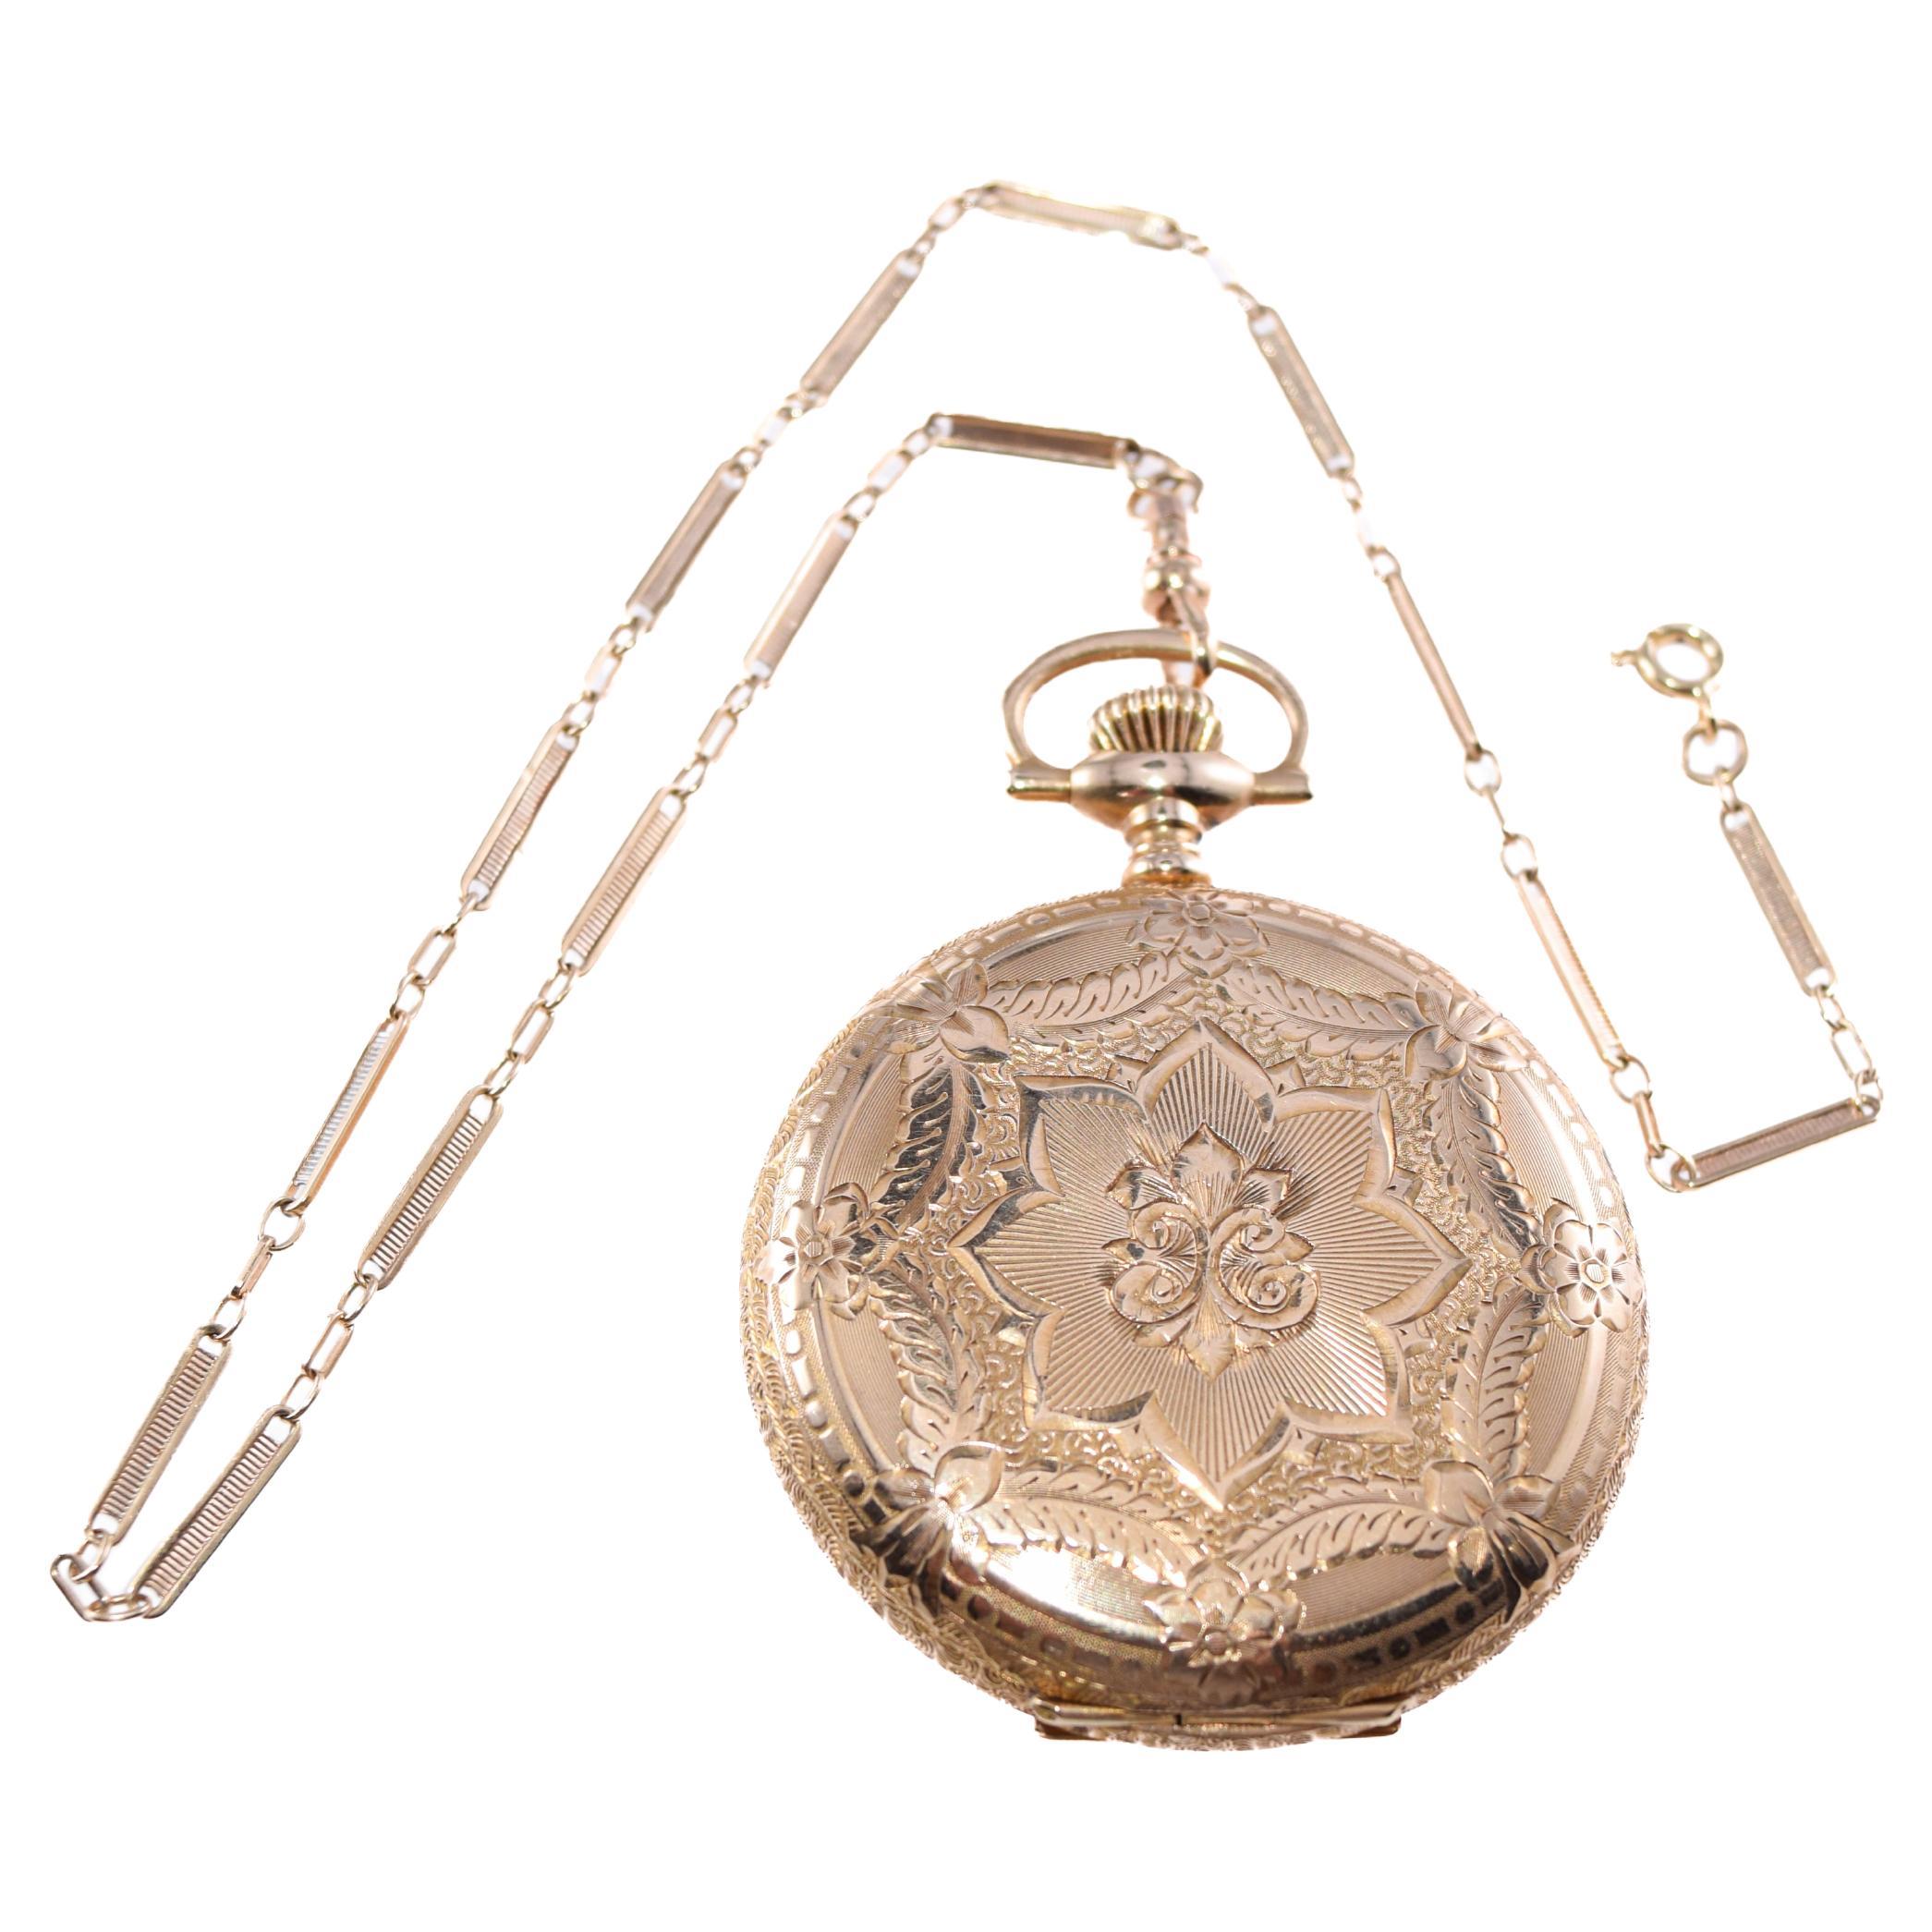 Waltham 14k Yellow Gold Hunters Cased Pocket Watch Circa 1900 Hand Engraved For Sale